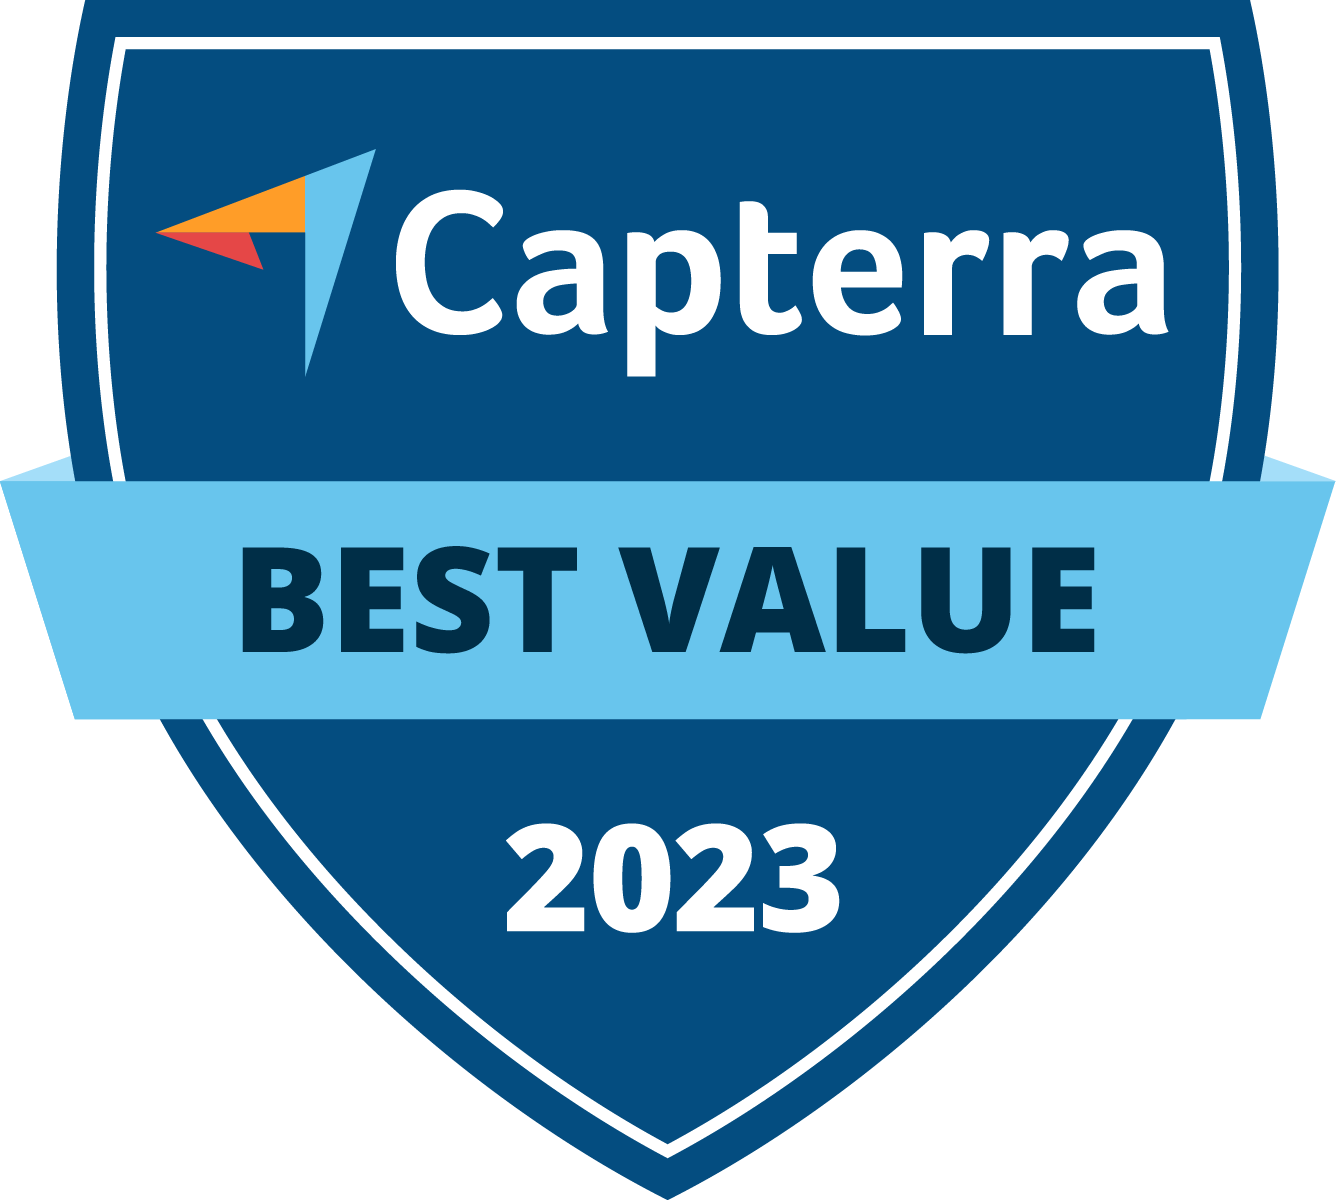 Capterra Best Value 2023 icon